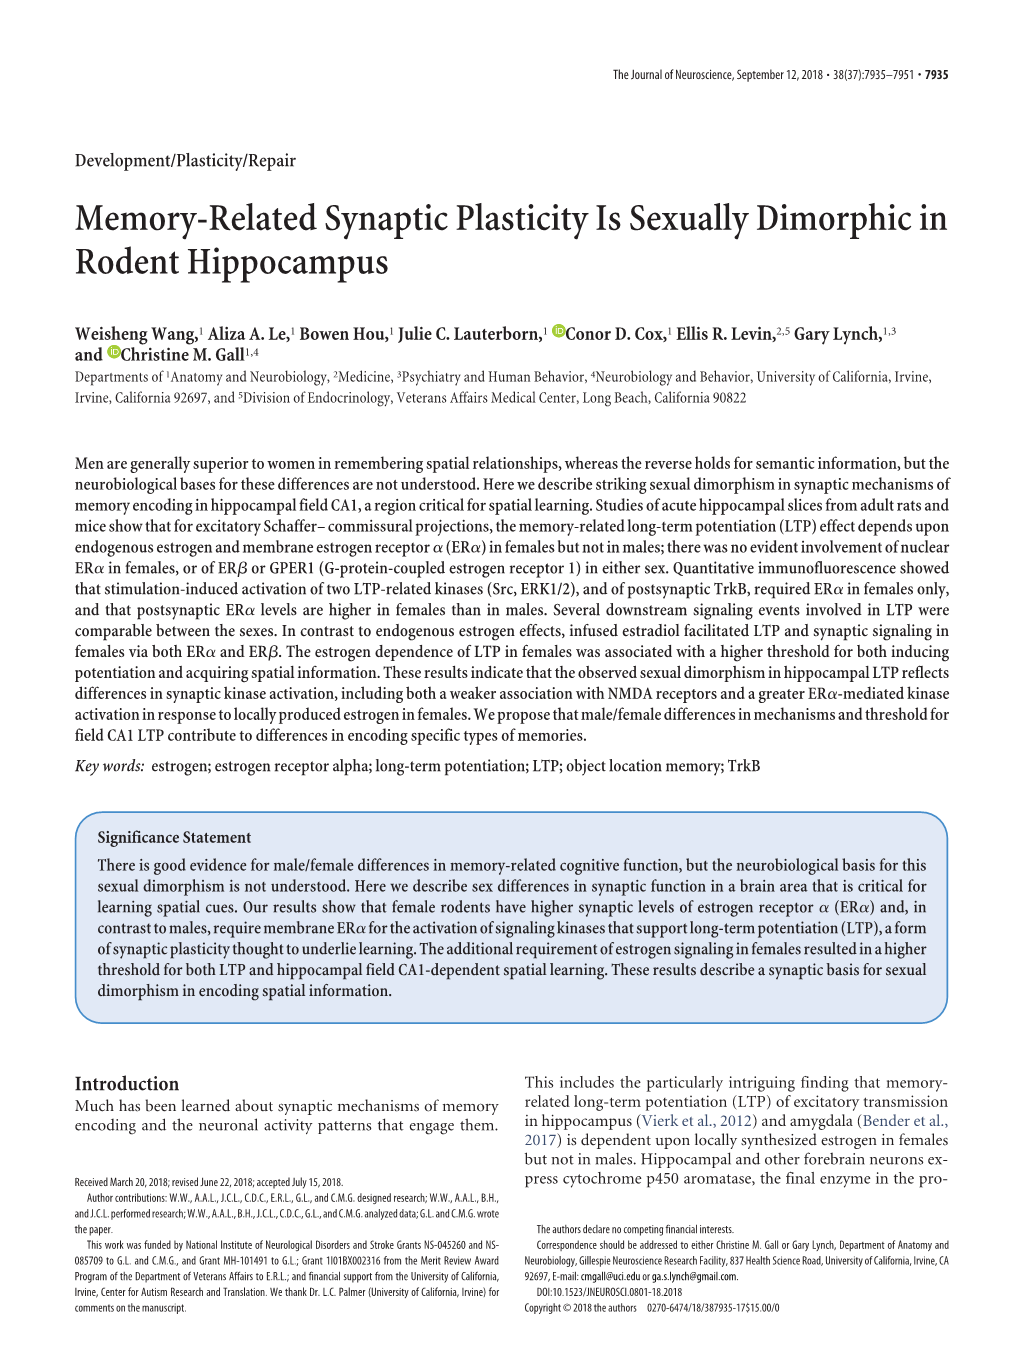 Memory-Related Synaptic Plasticity Is Sexually Dimorphic in Rodent Hippocampus